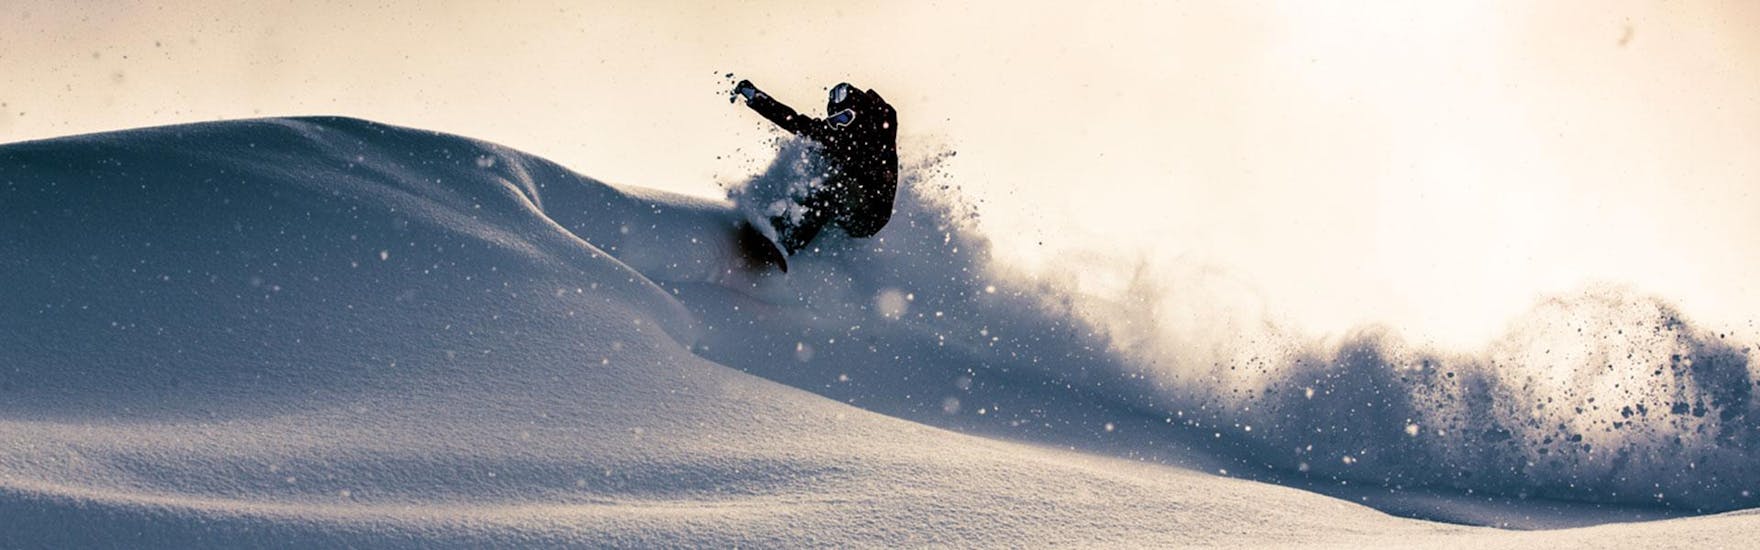 A snowboarder is riding through deep powder snow during his Private Off-Piste Snowboard Lessons - All Levels with BOARD.AT.